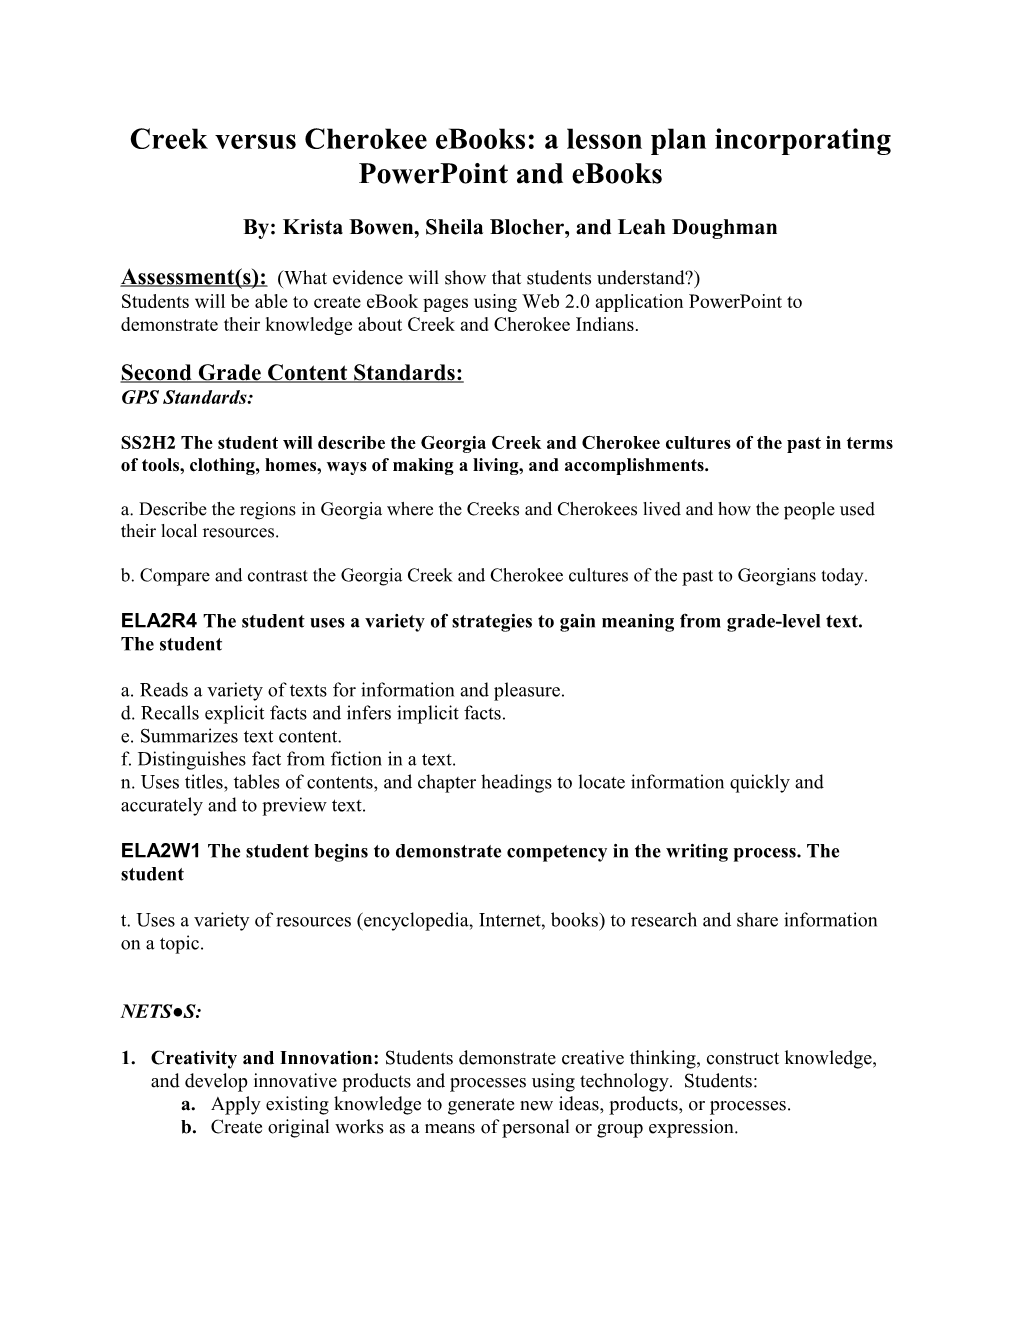 Creek Versus Cherokee Ebooks: a Lesson Plan Incorporating Powerpoint and Ebooks